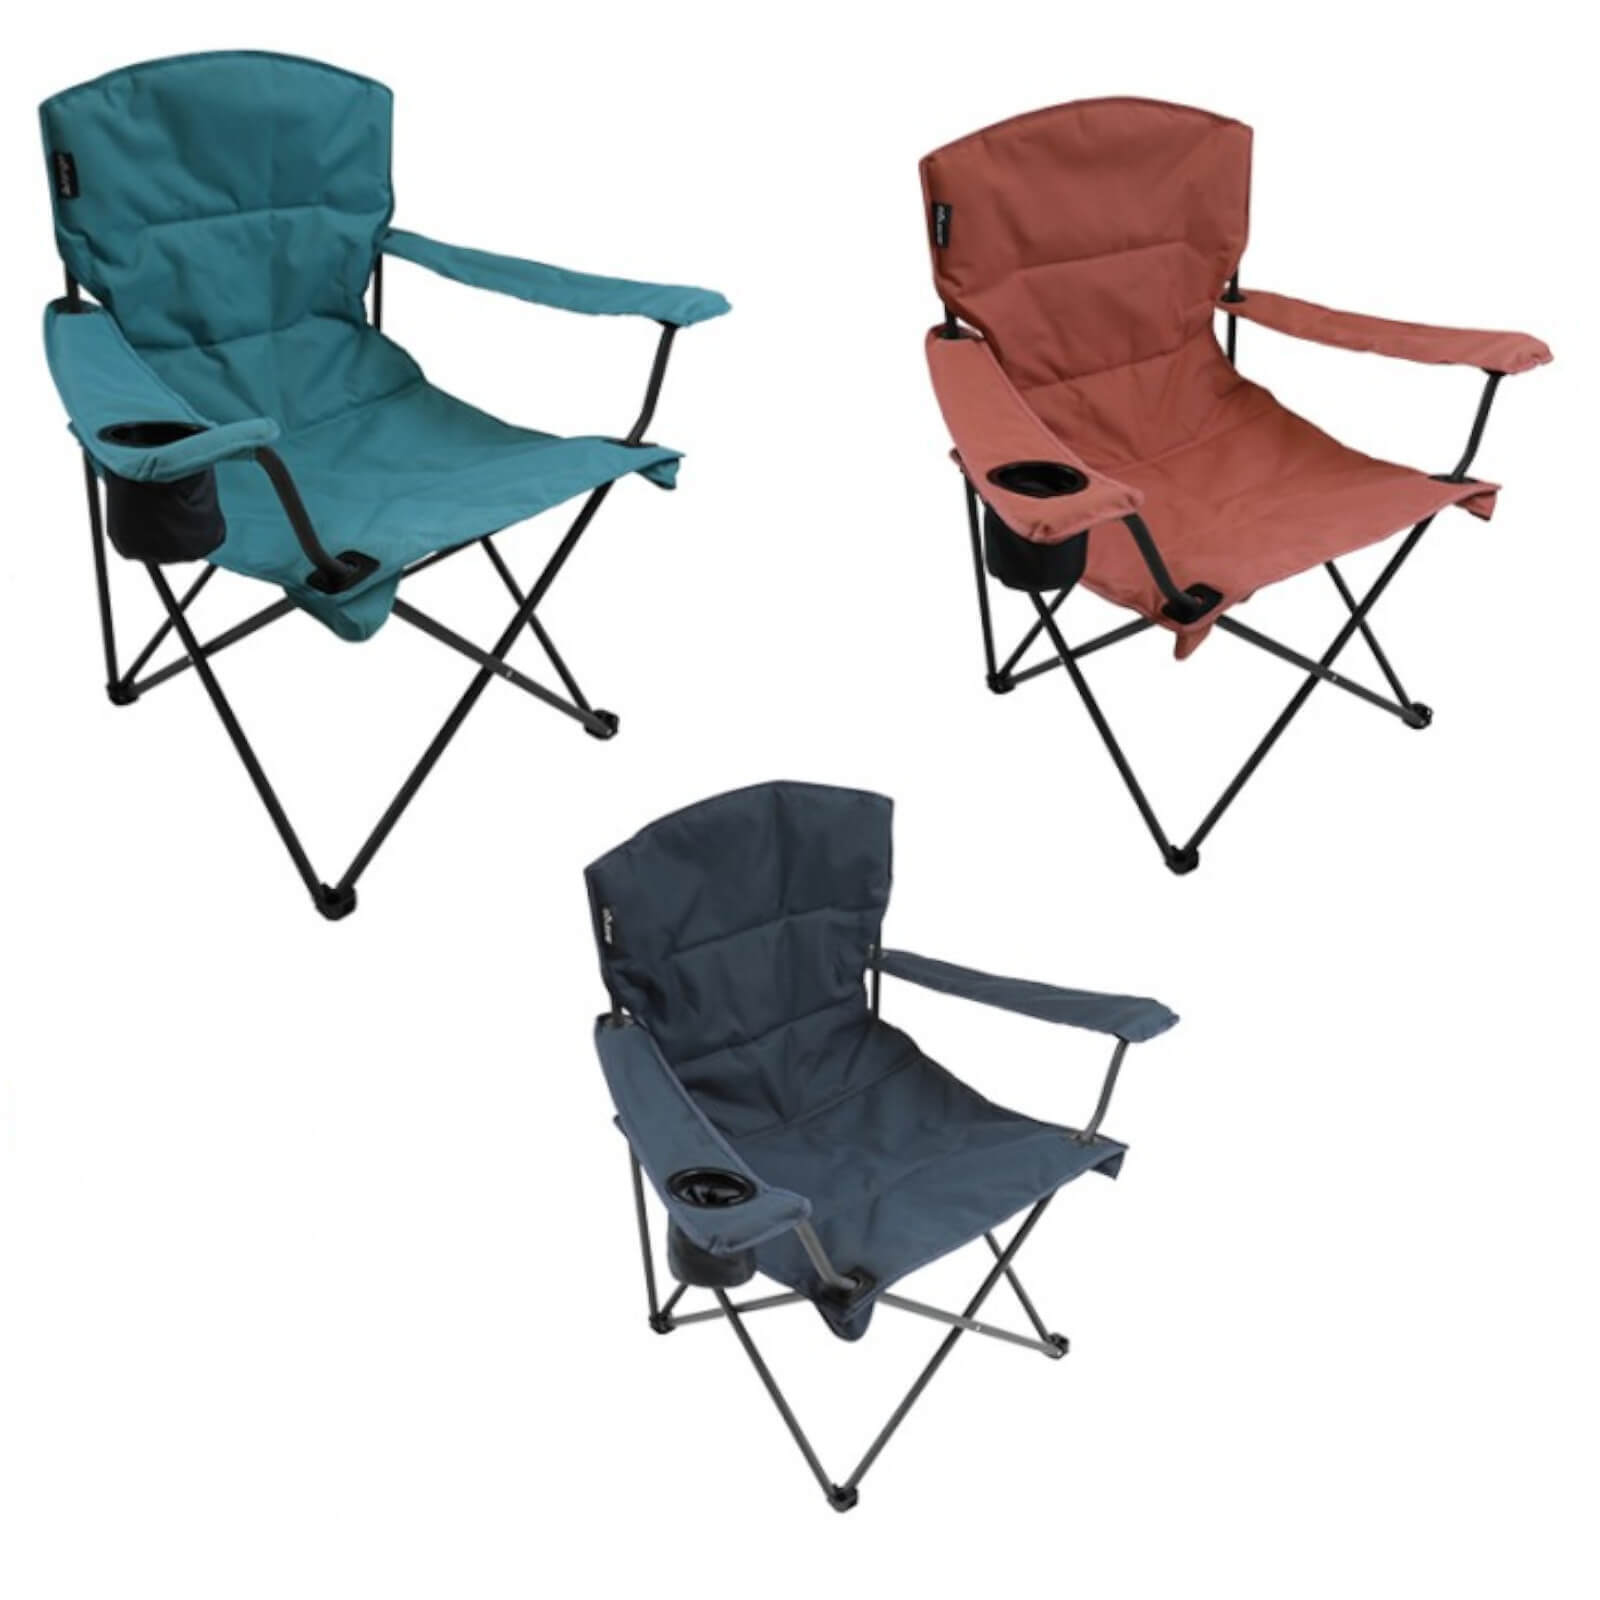 Vango Malibu Value Camping Chair in Red Green or Grey